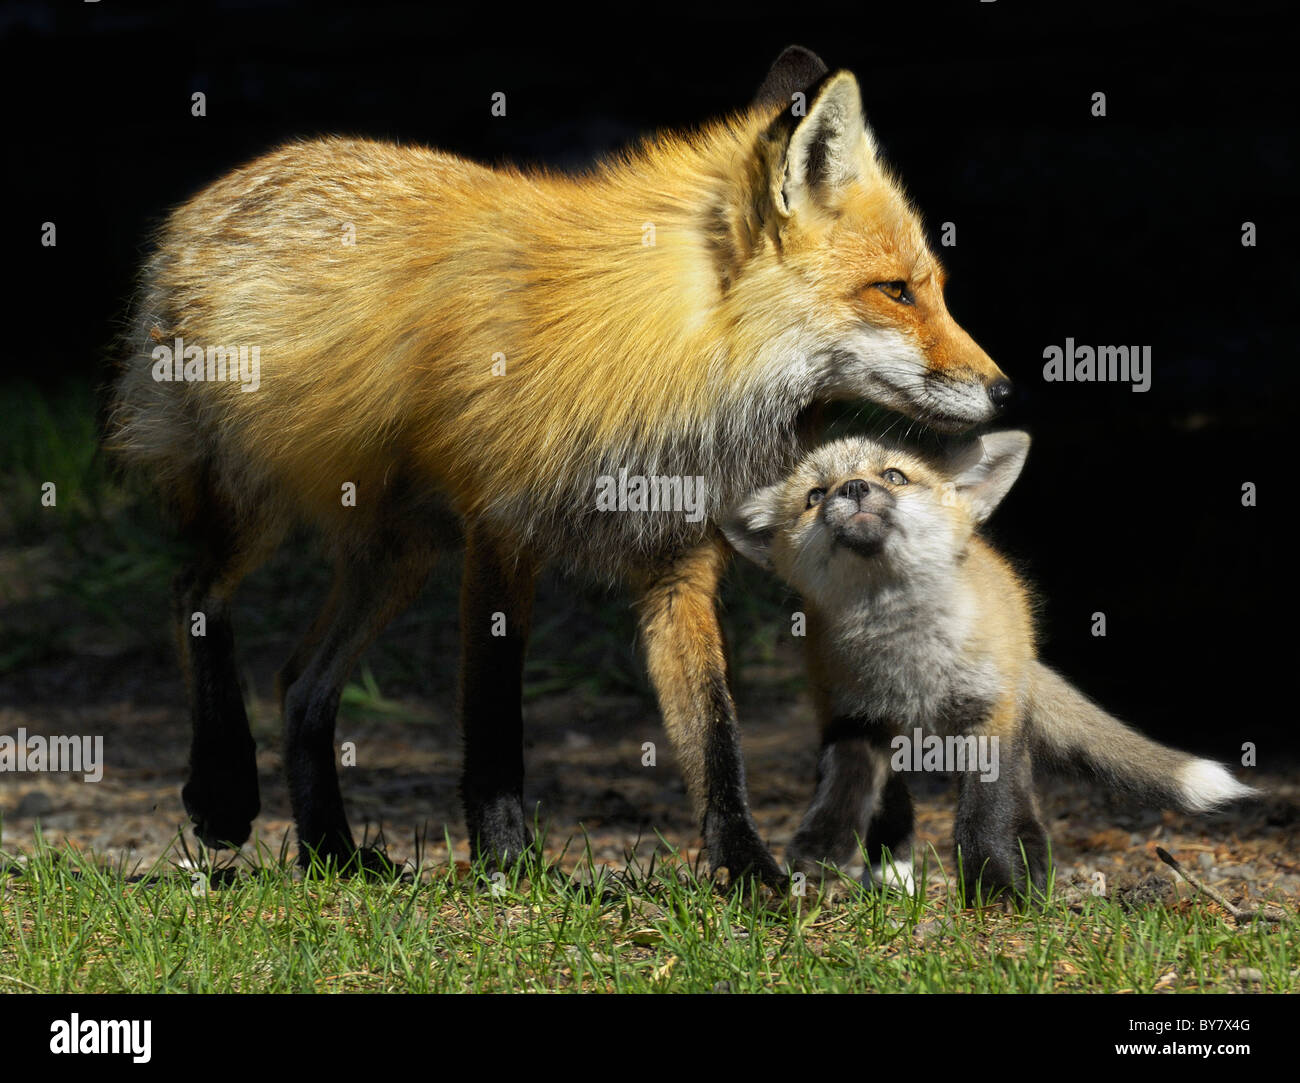 Red Fox baby trying to get mother's attention. Stock Photo